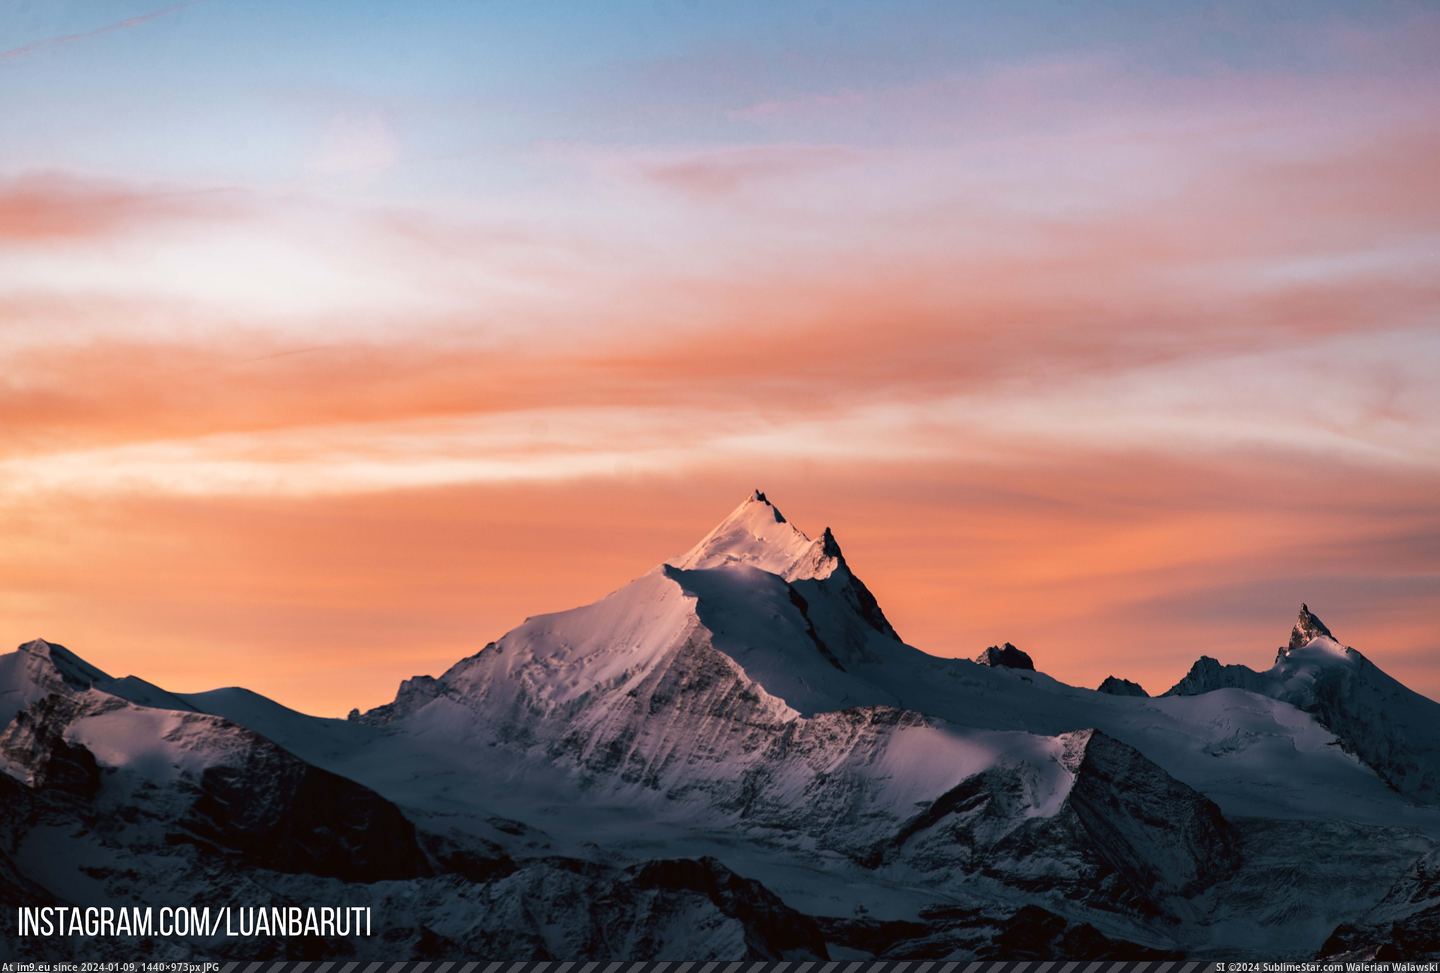 [Earthporn] I spent the night on 10.000ft to catch the Weisshorn mountain at dawn. [original file in comments] [6016x4016] (in My r/EARTHPORN favs)